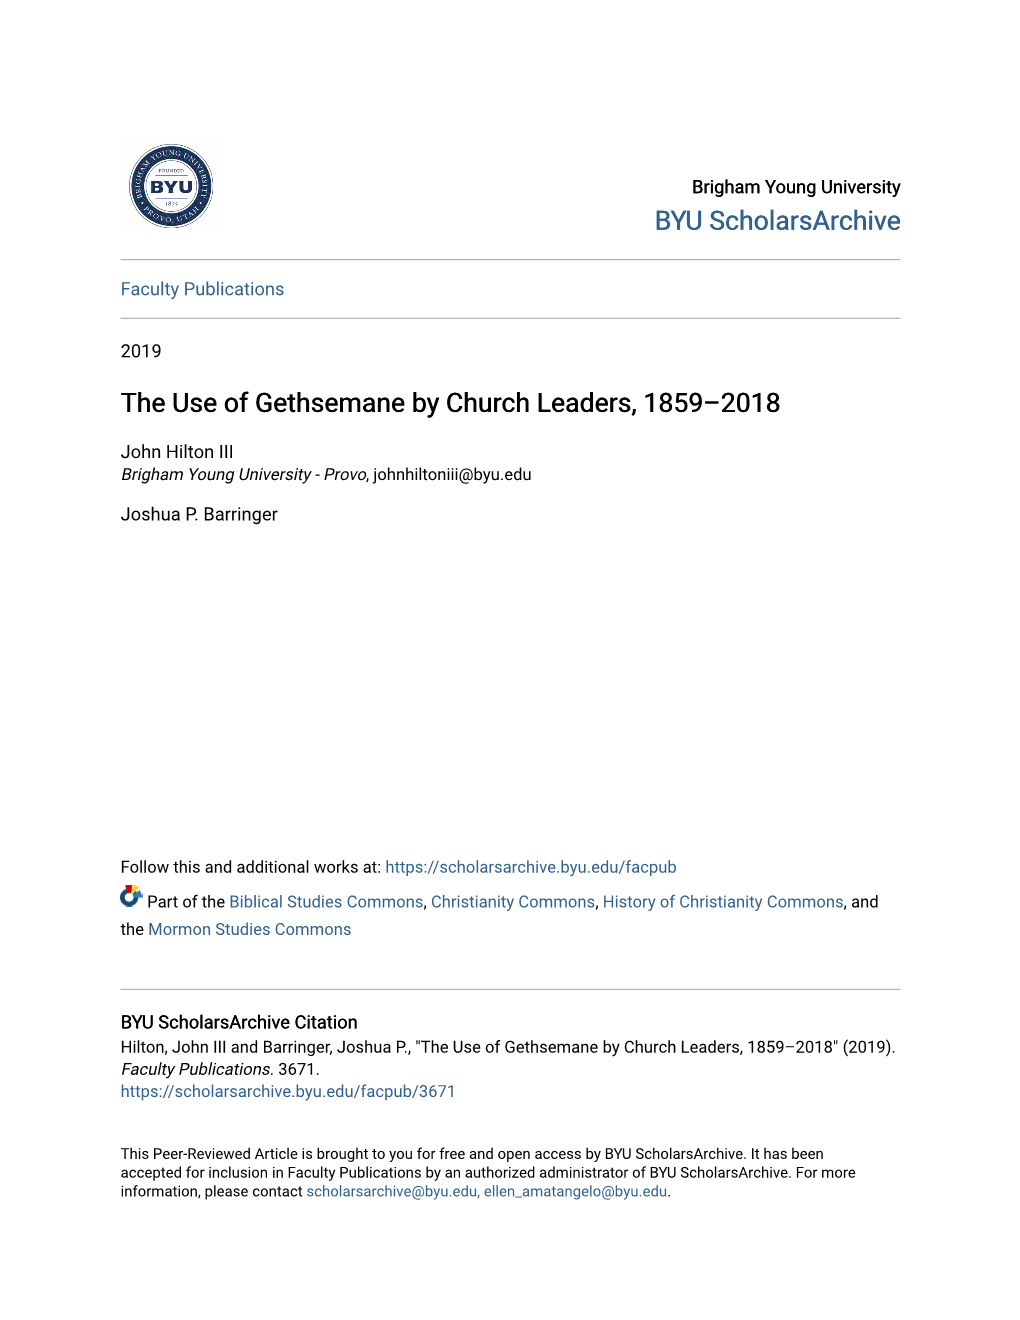 The Use of Gethsemane by Church Leaders, 1859–2018